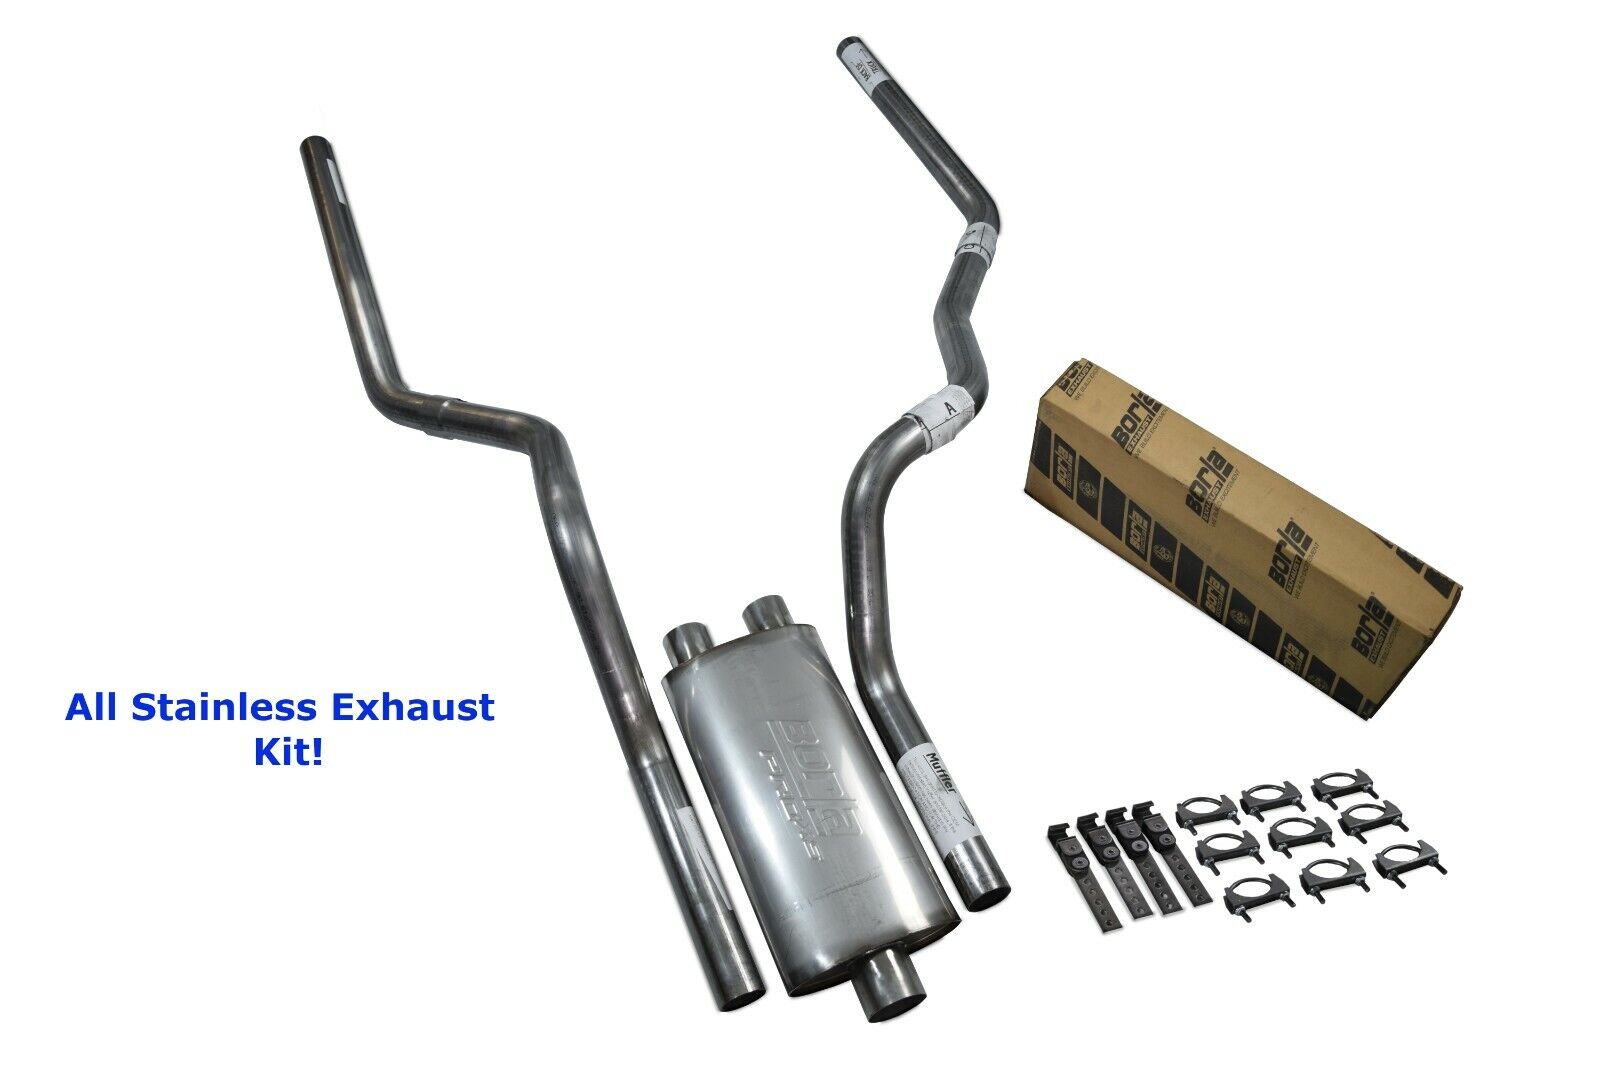 All-Stainless Dual Exhaust Kit Chevy GMC 1500 15-18 Borla Pro XS Rear Exit